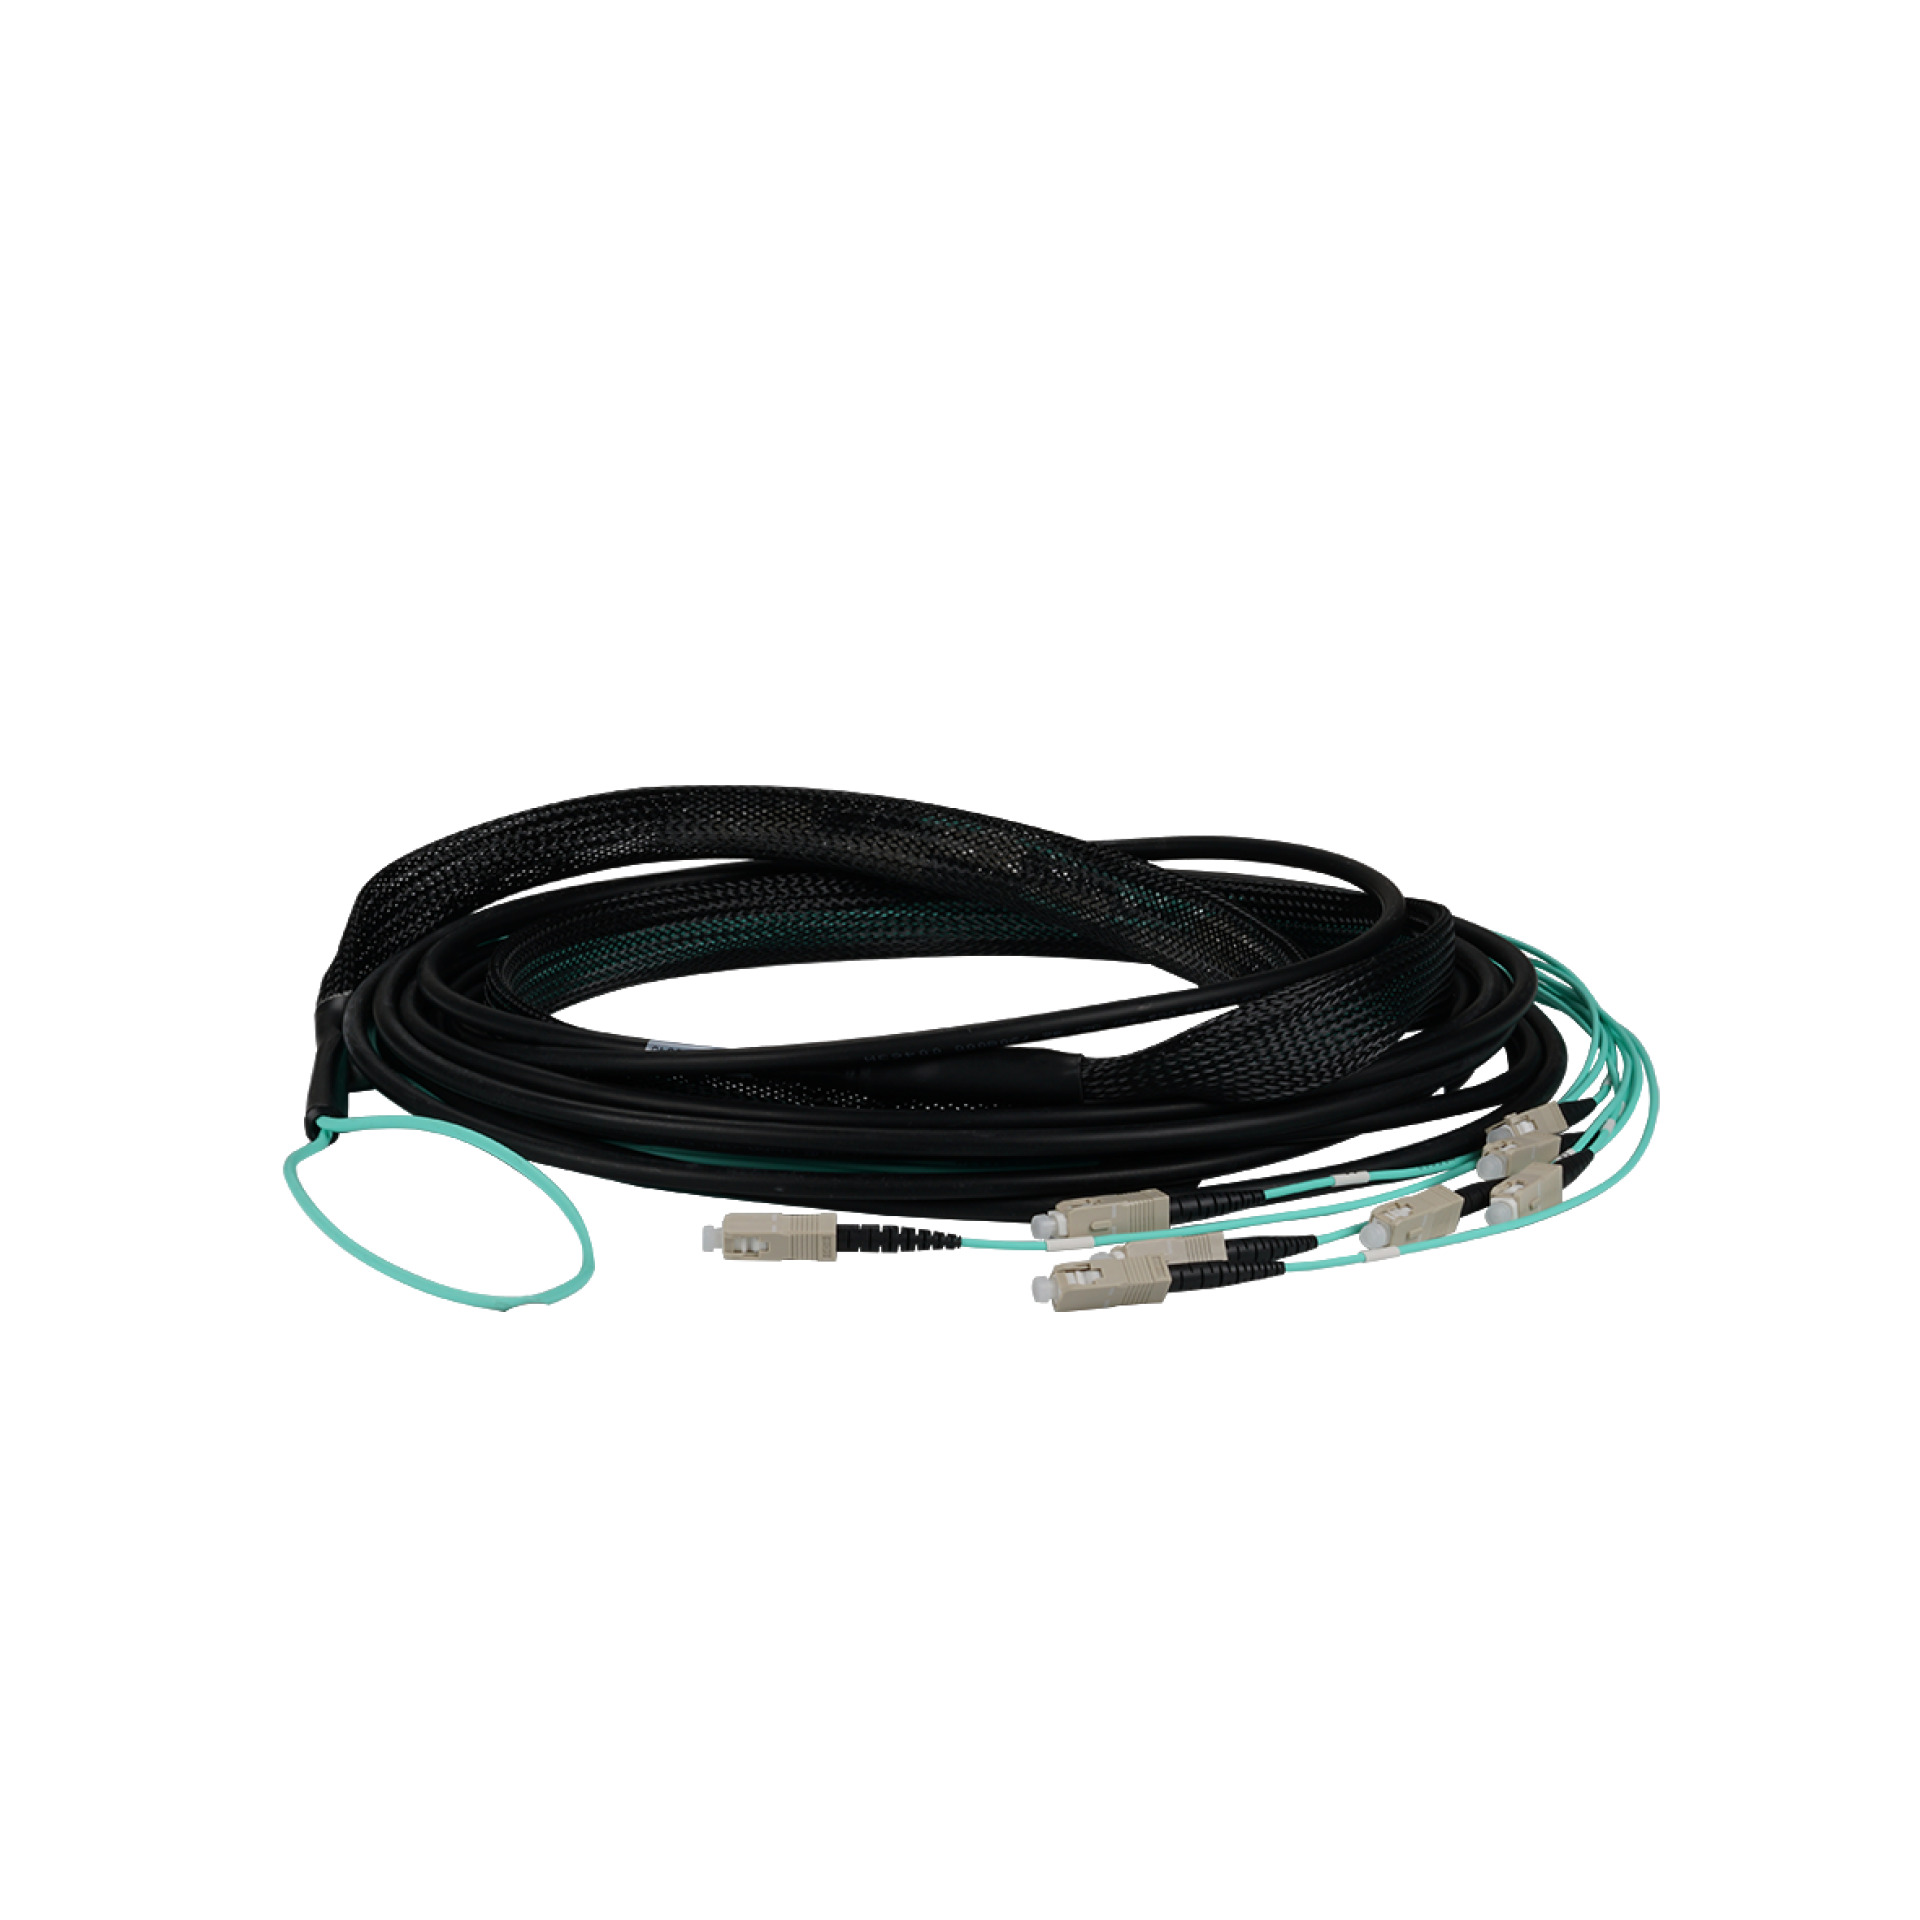 Trunk cable U-DQ(ZN)BH 8G 50/125, SC/SC OM3 90m